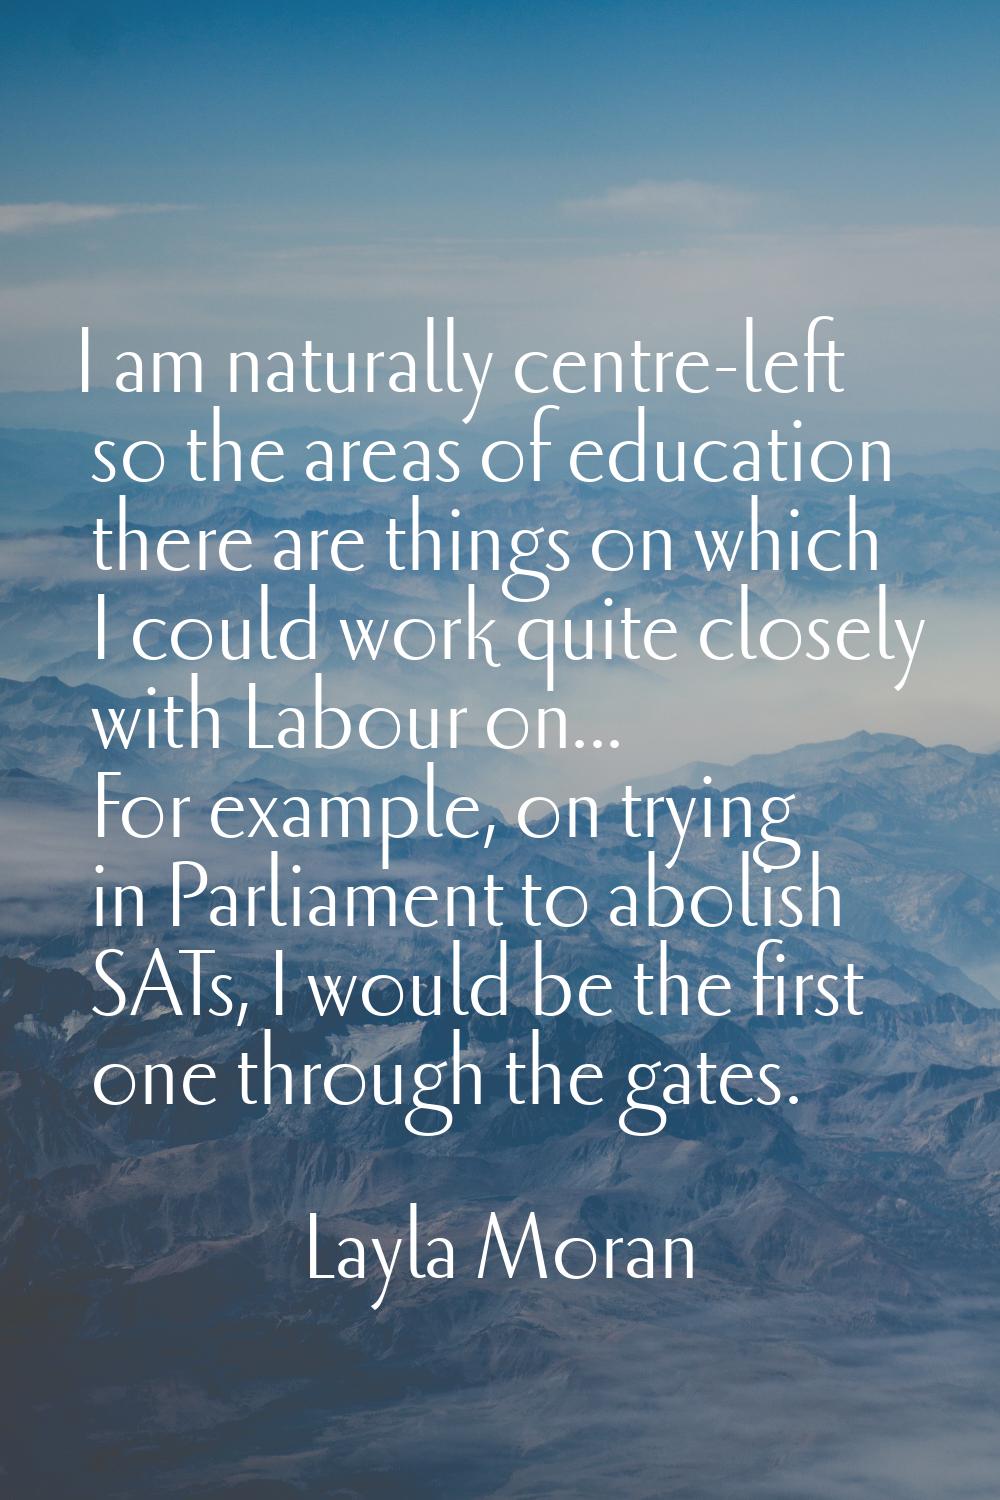 I am naturally centre-left so the areas of education there are things on which I could work quite c